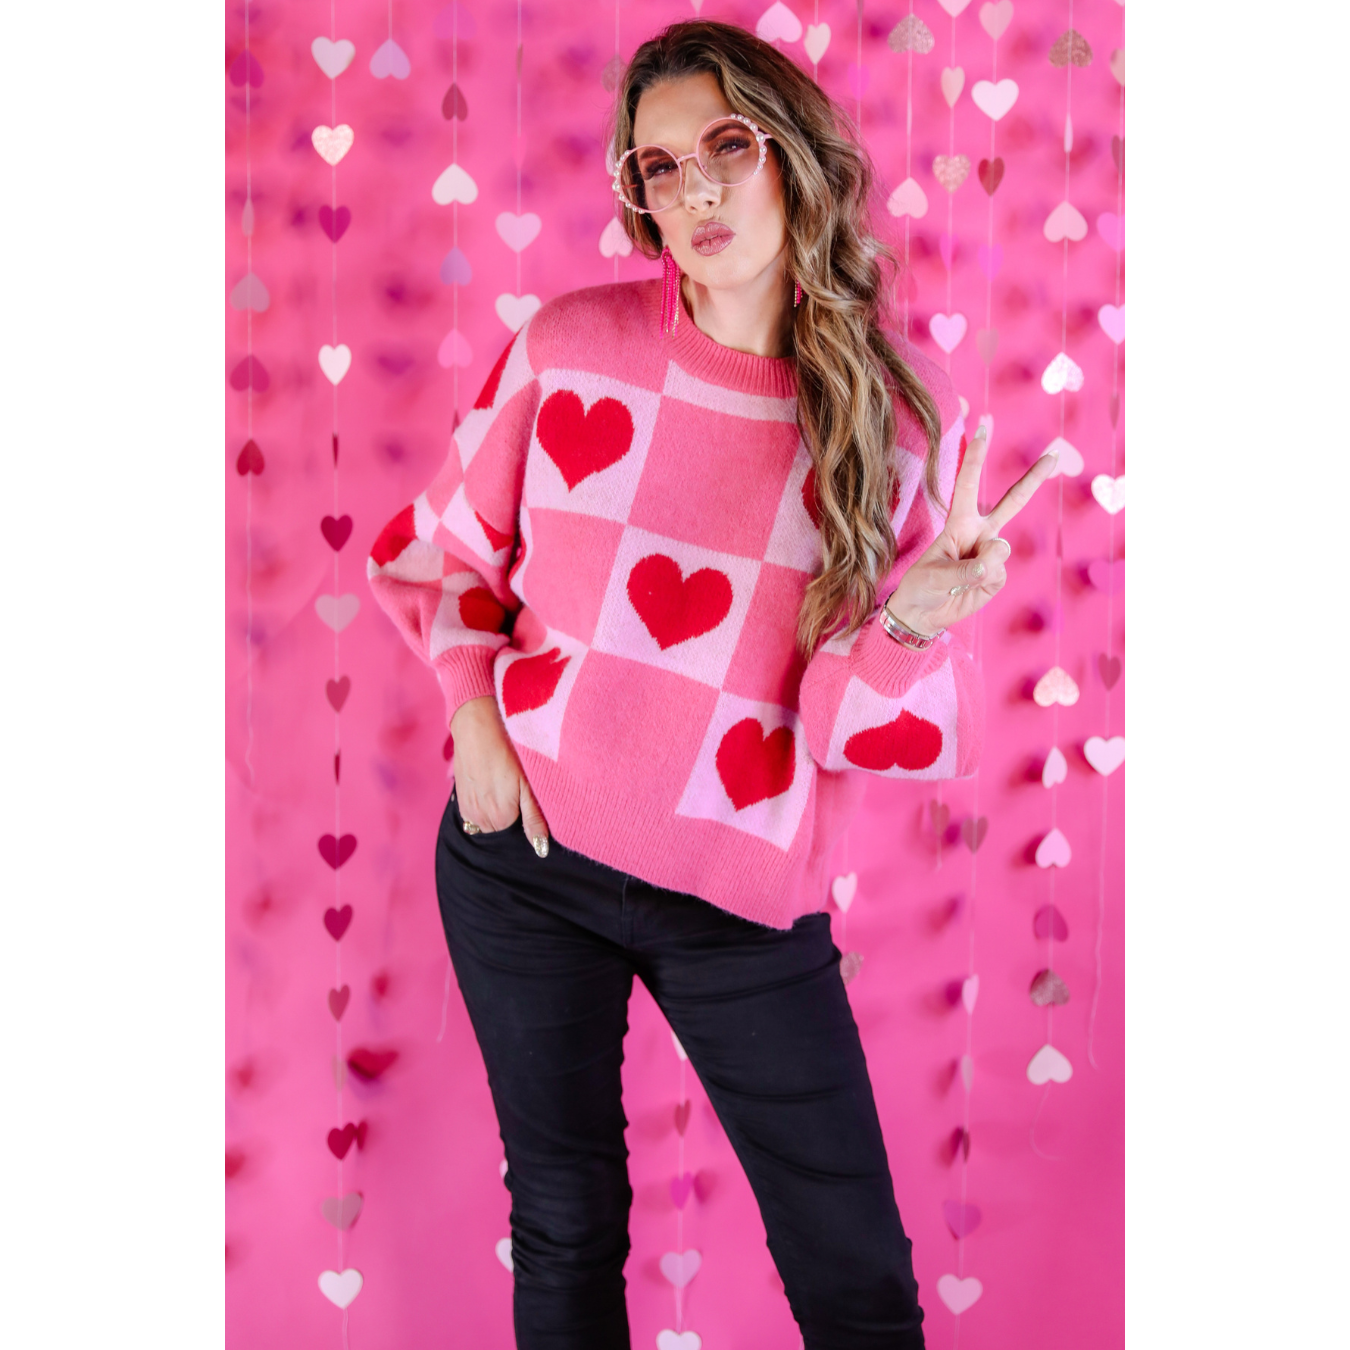 Layers of Love Heart Sweater by Jess Lea available in sizes Small through Large  Red hearts on pink squares.  Checkerboard pattern.  39% Acrylic, 31% Polyester, 30% Polyamide 